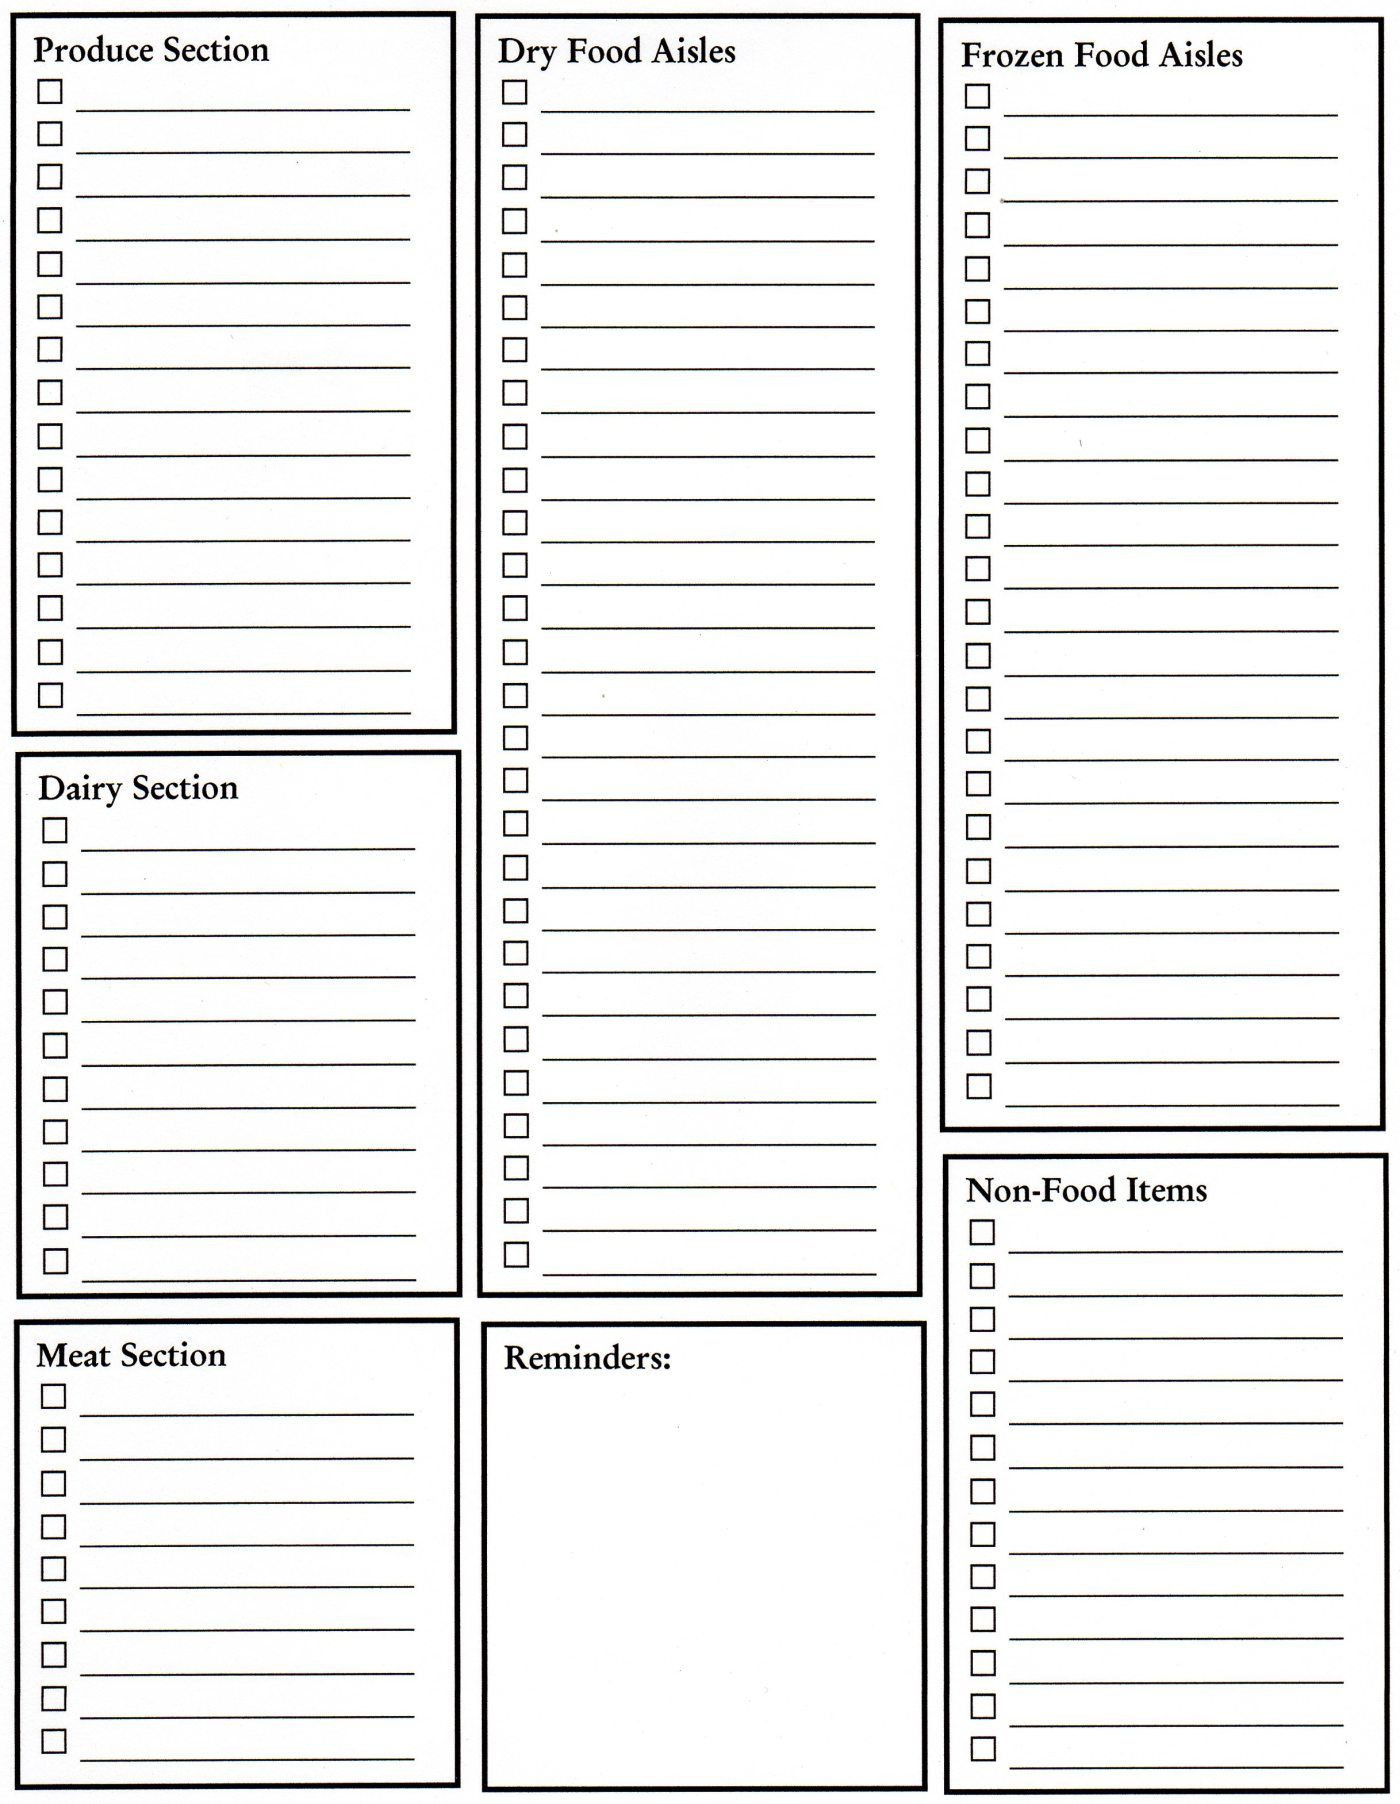 Need A Blank Spreadsheet In Grocery Spreadsheet And Grocery List Blank Template Great Idea Need